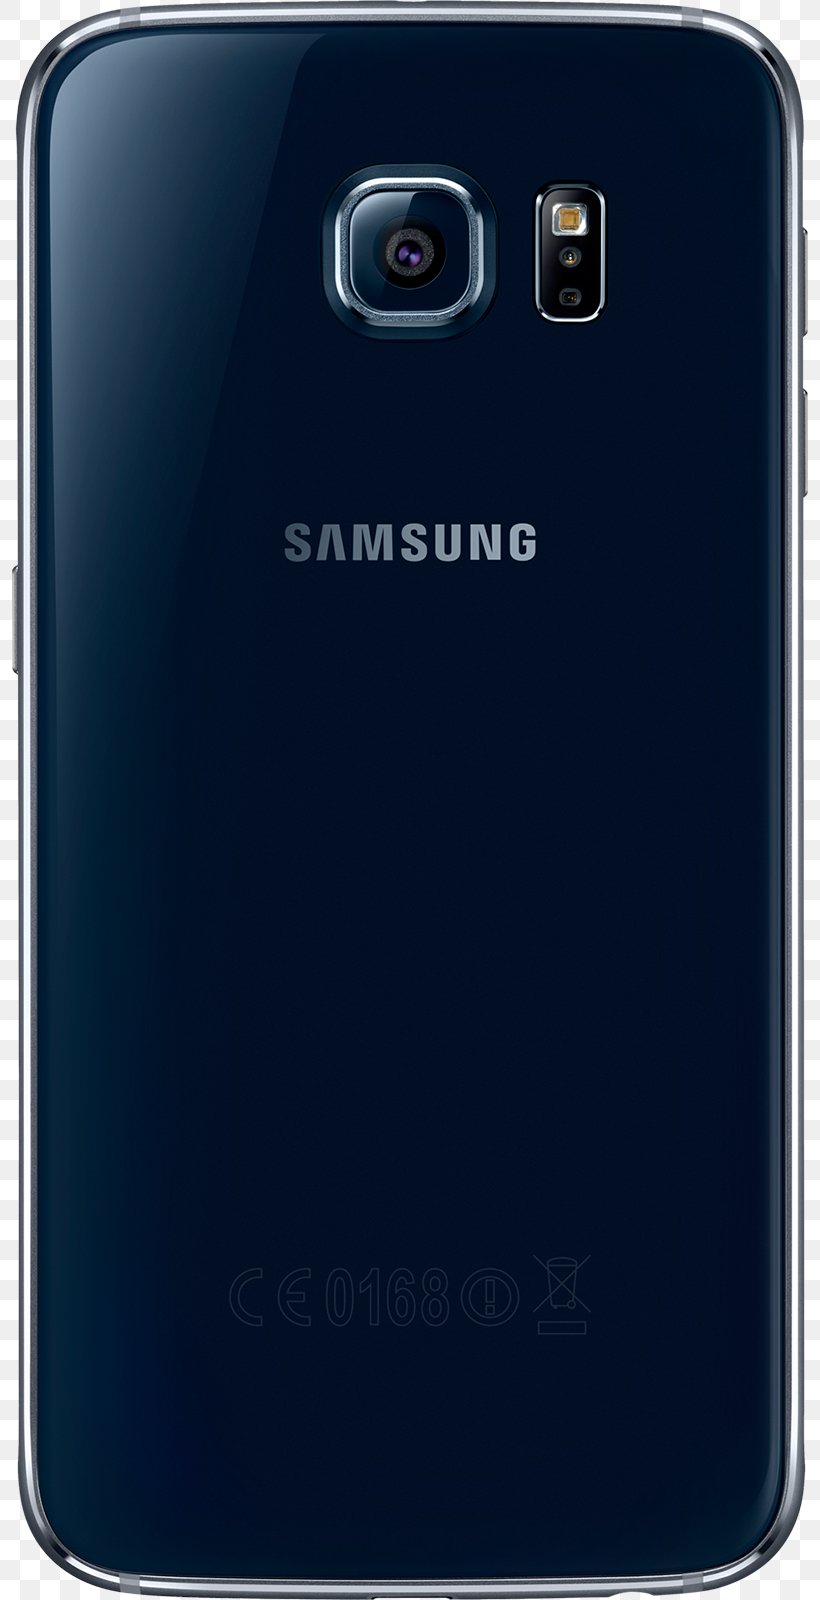 Samsung Galaxy S6 Edge Telephone Black Sapphire Smartphone, PNG, 796x1600px, Samsung Galaxy S6 Edge, Black Sapphire, Cellular Network, Communication Device, Electric Blue Download Free